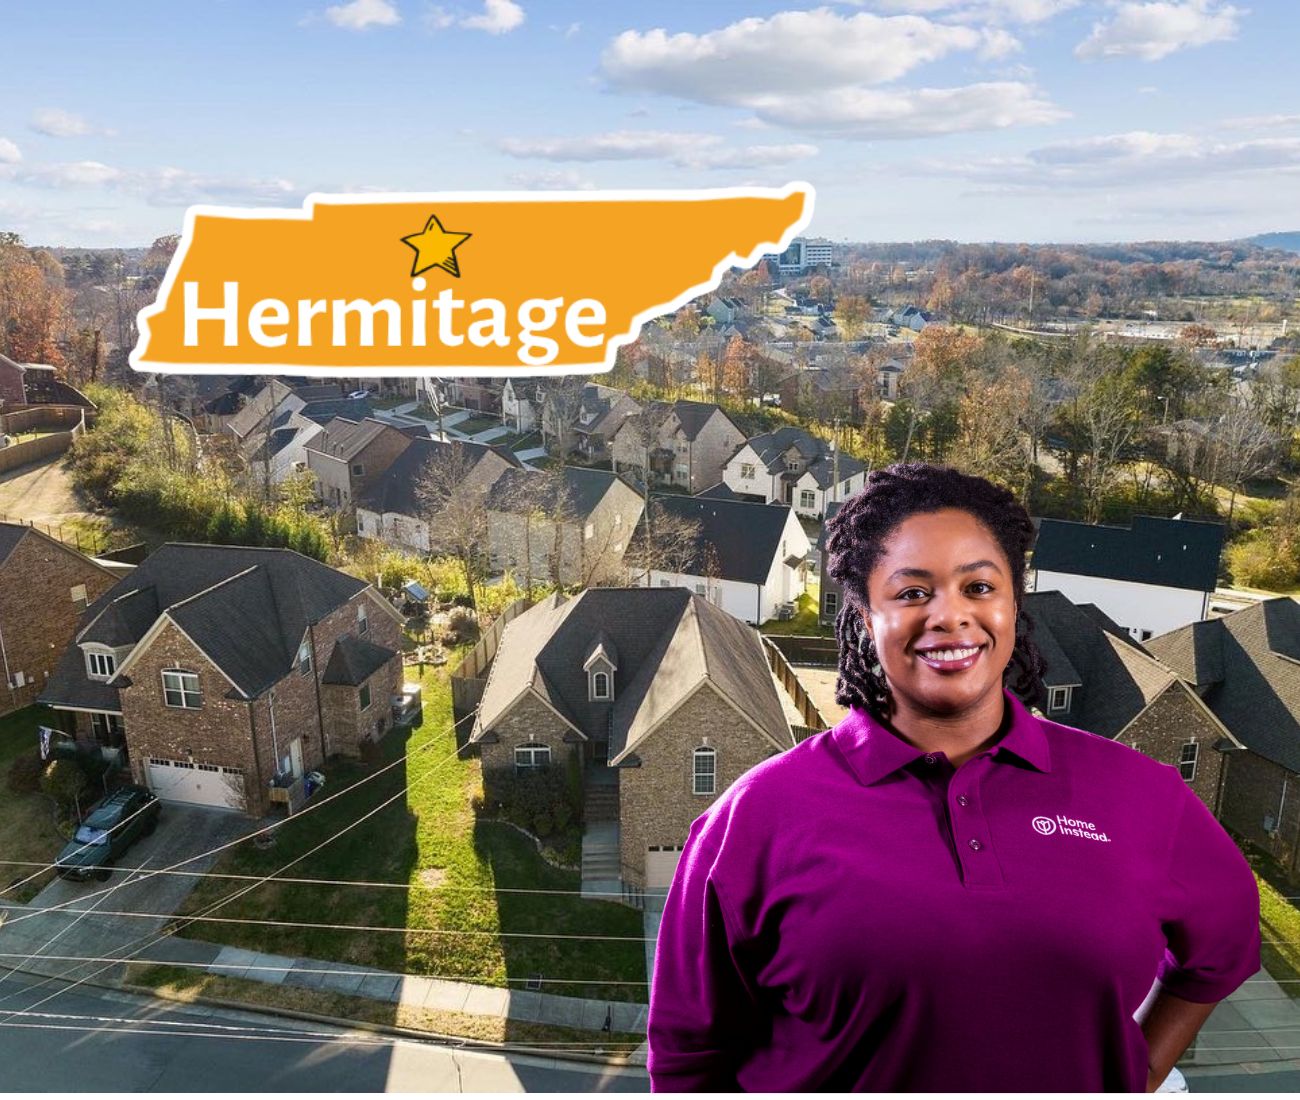 Home Instead caregiver with Hermitage Tennessee in the background